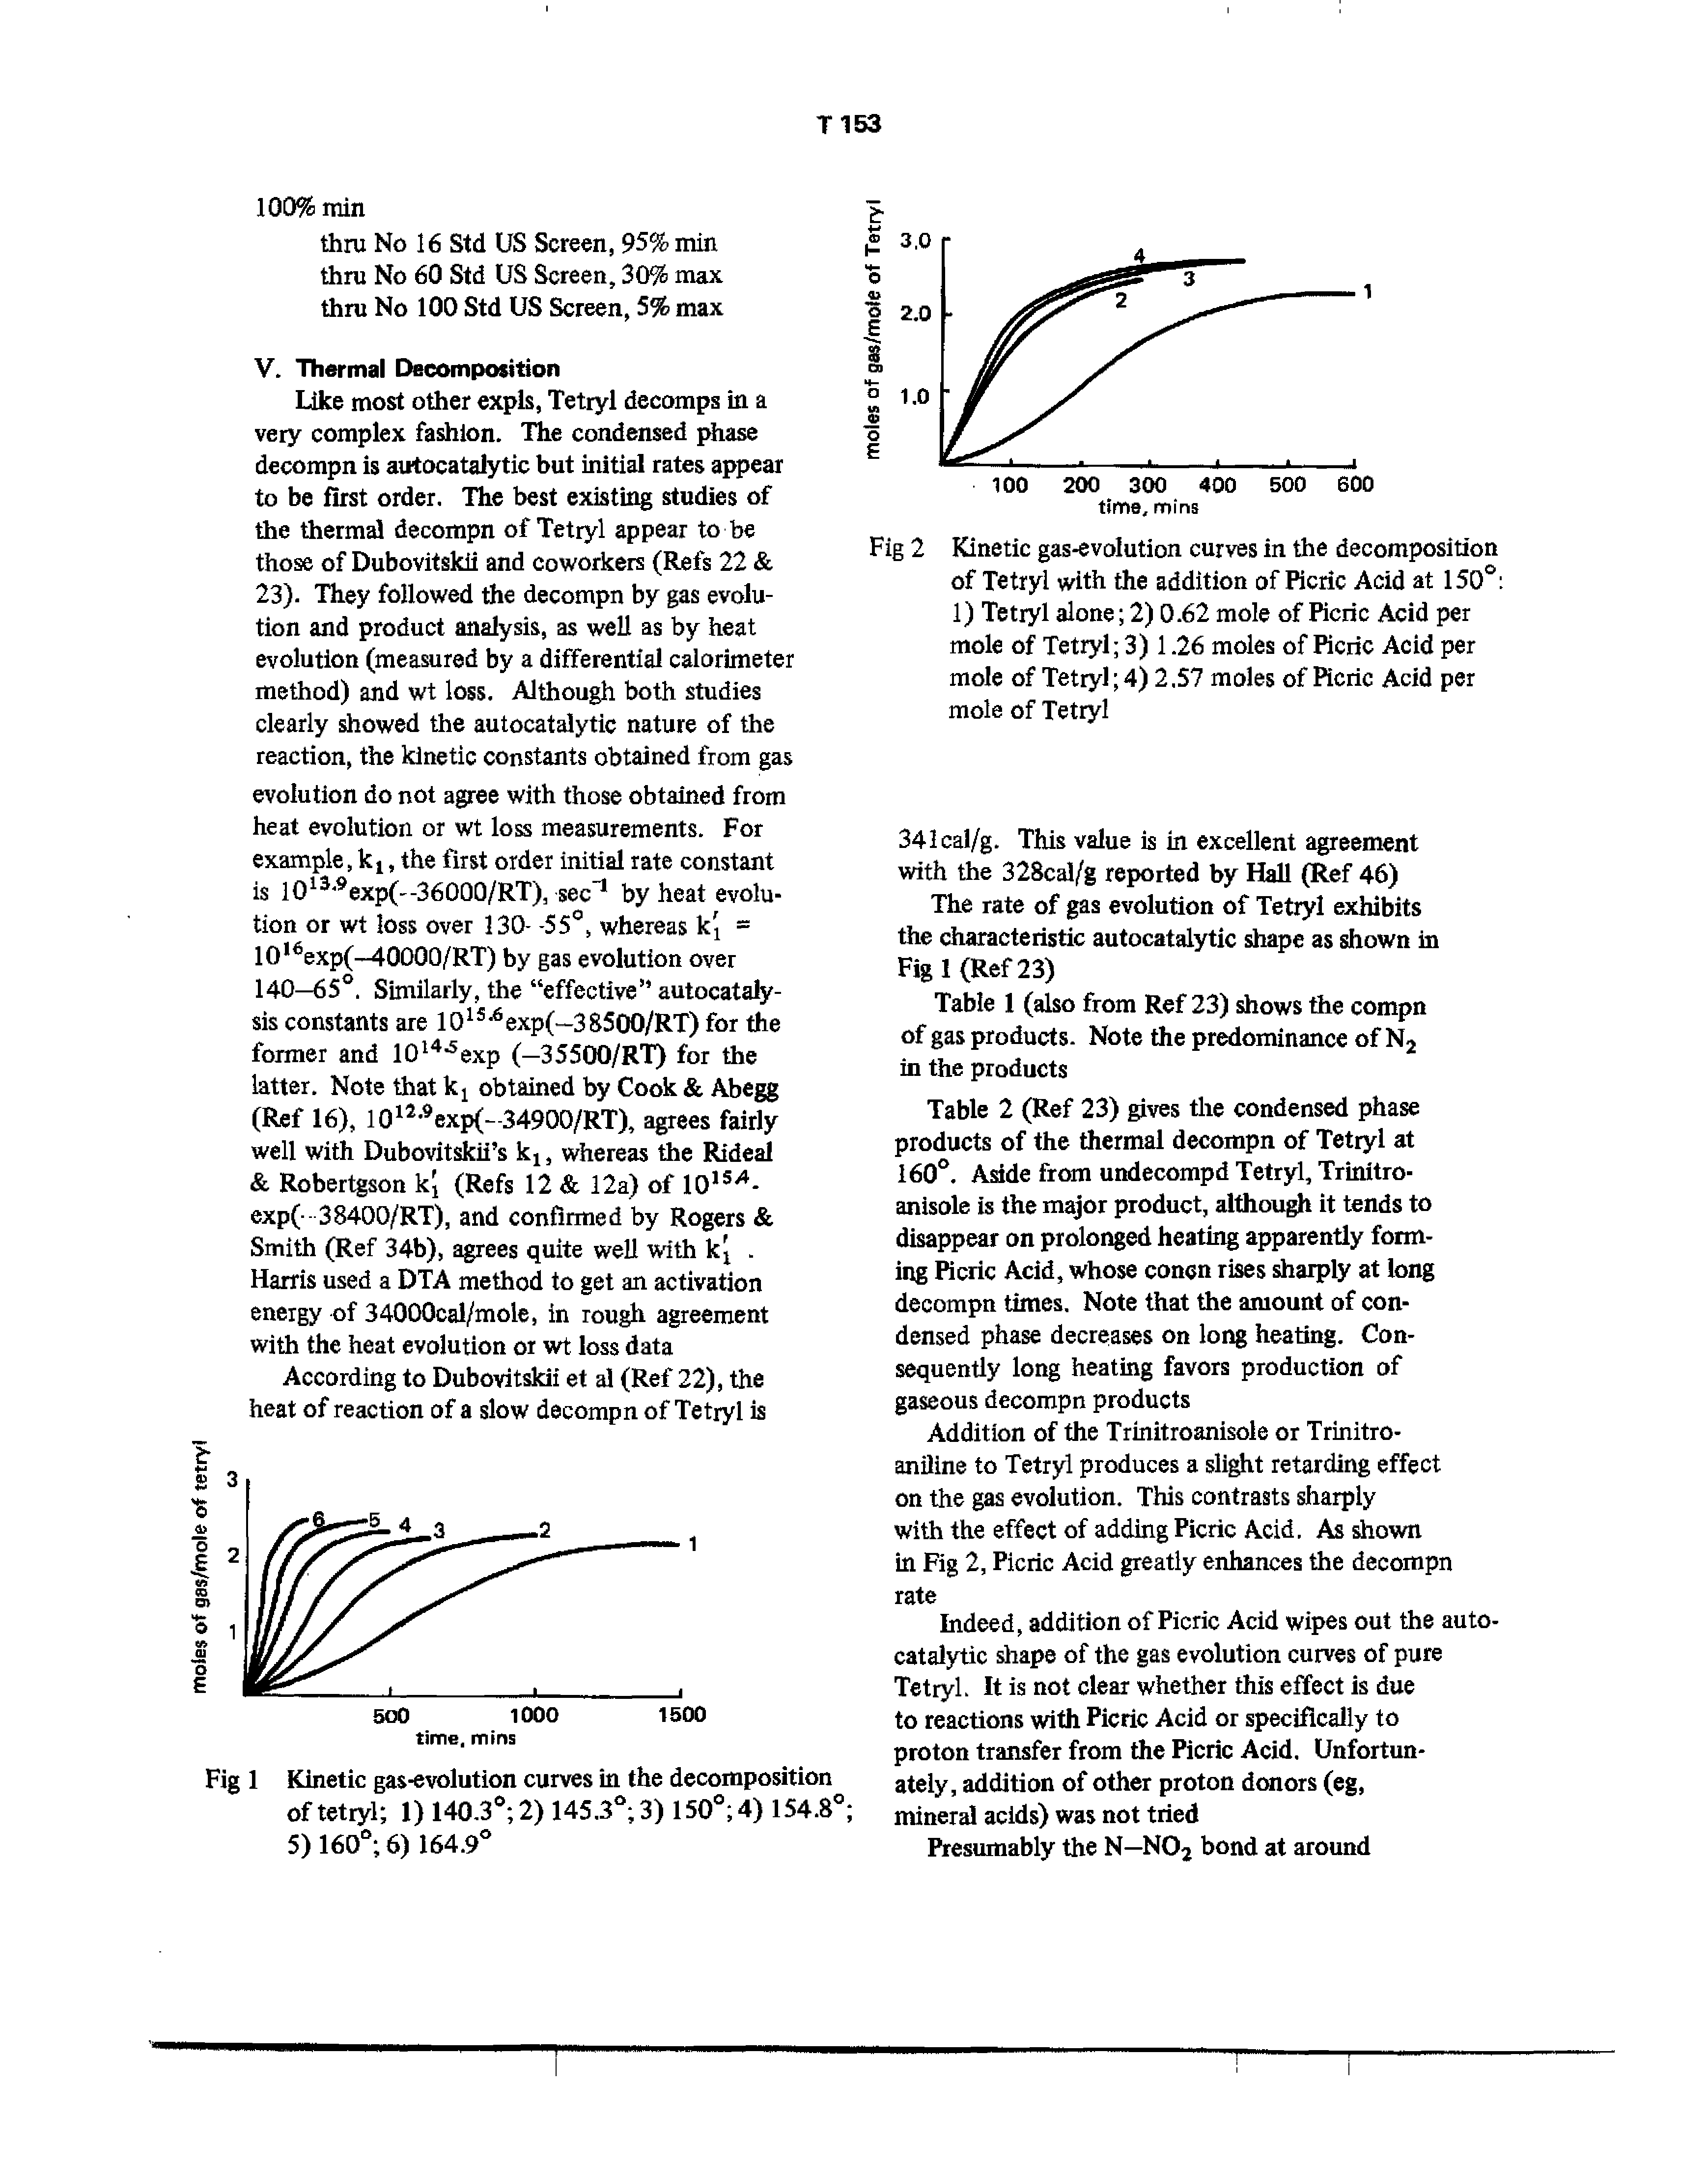 Table 2 (Ref 23) gives the condensed phase products of the thermal decompn of Tetryl at 160°. Aside from undecompd Tetryl, Trinitro-anisole is the major product, although it tends to disappear on prolonged heating apparently forming Picric Acid, whose concn rises sharply at long decompn times. Note that the amount of condensed phase decreases on long heating. Consequently long heating favors production of gaseous decompn products...